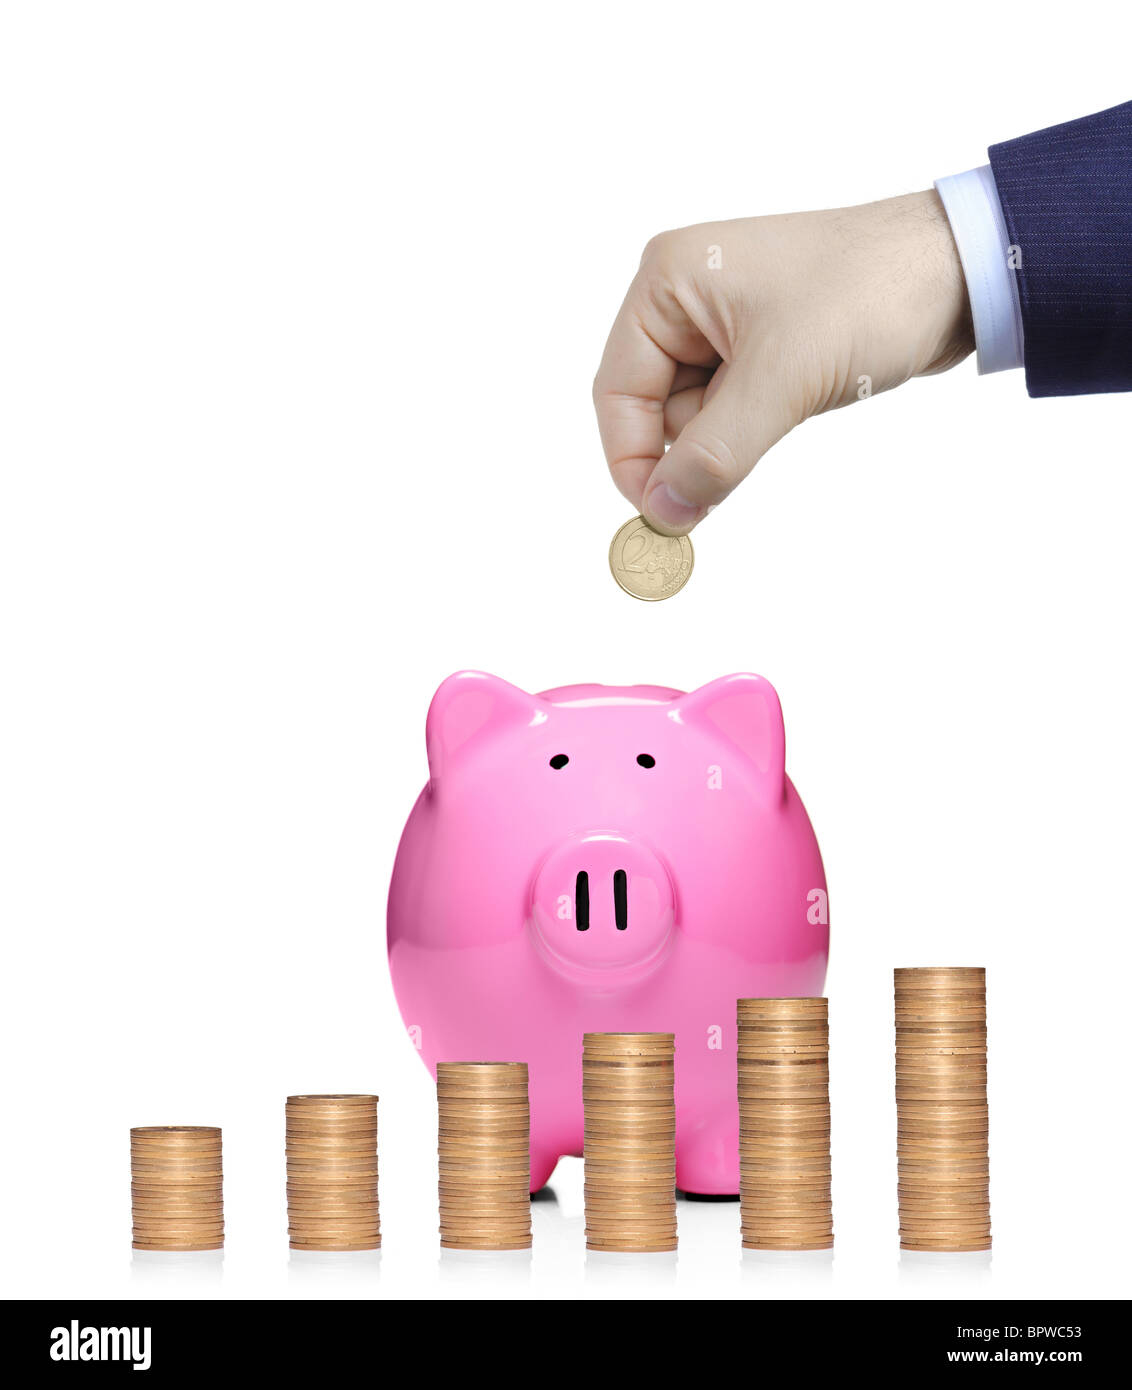 Person inserting a coin into a pink piggy bank with stack of coins in front showing growth Stock Photo